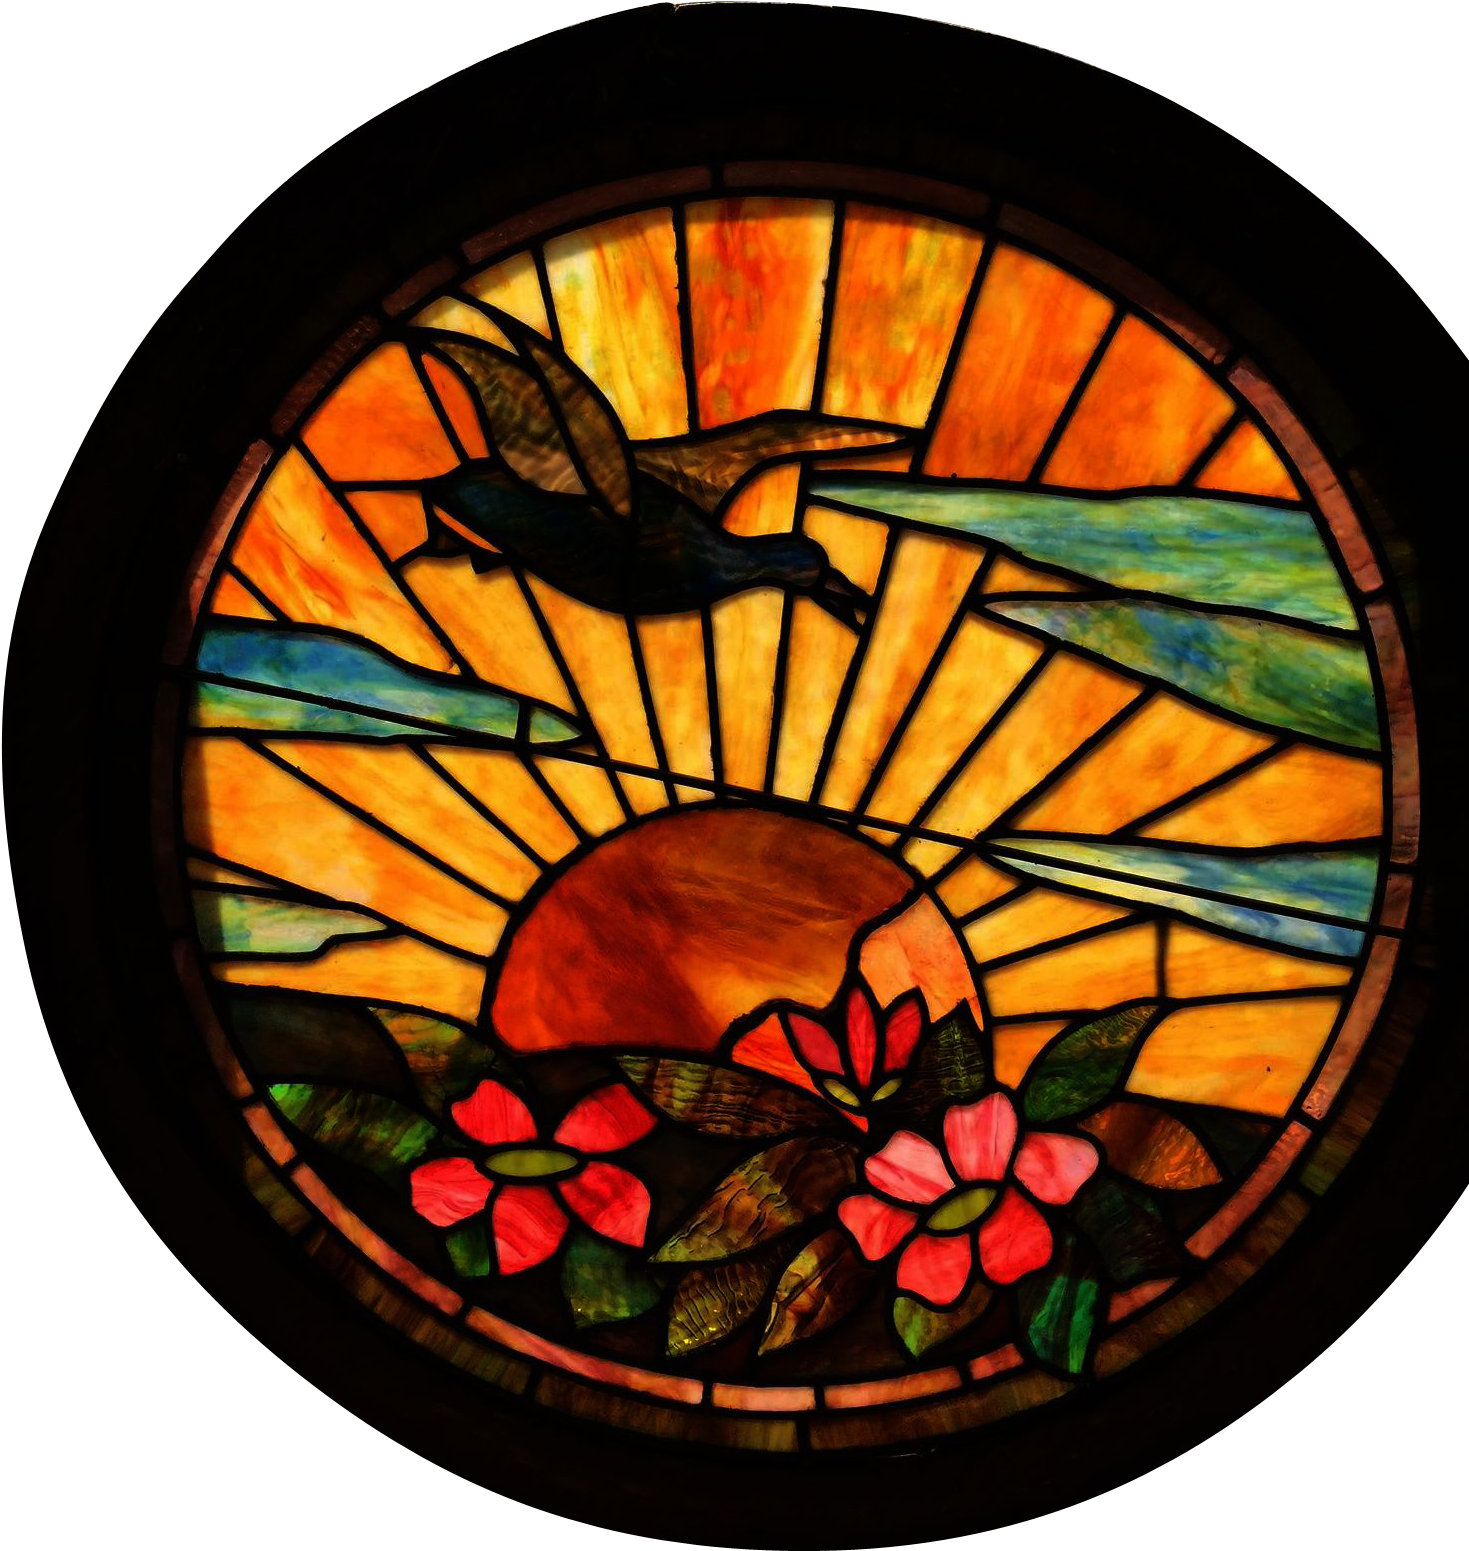 Spectacular Colors In This Scenic Stained Glass Window - Stained Glass (1550x1550)